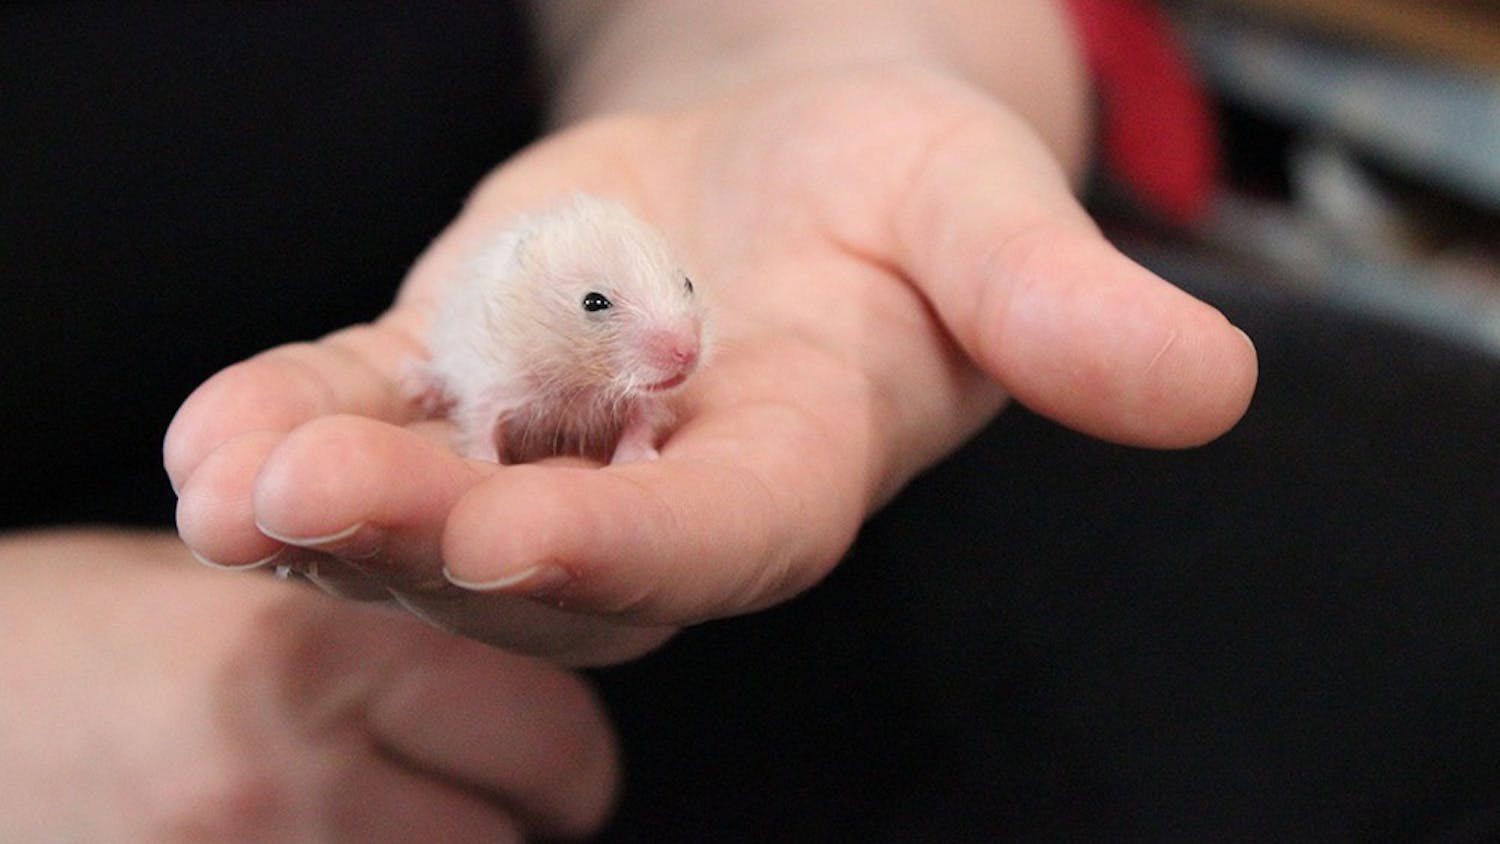 Alex Hernly, a founder of the Pipsqueakery, holds one of the baby hamsters rescued from a shelter in Florida. The hamster was one of 100 they rescued. 